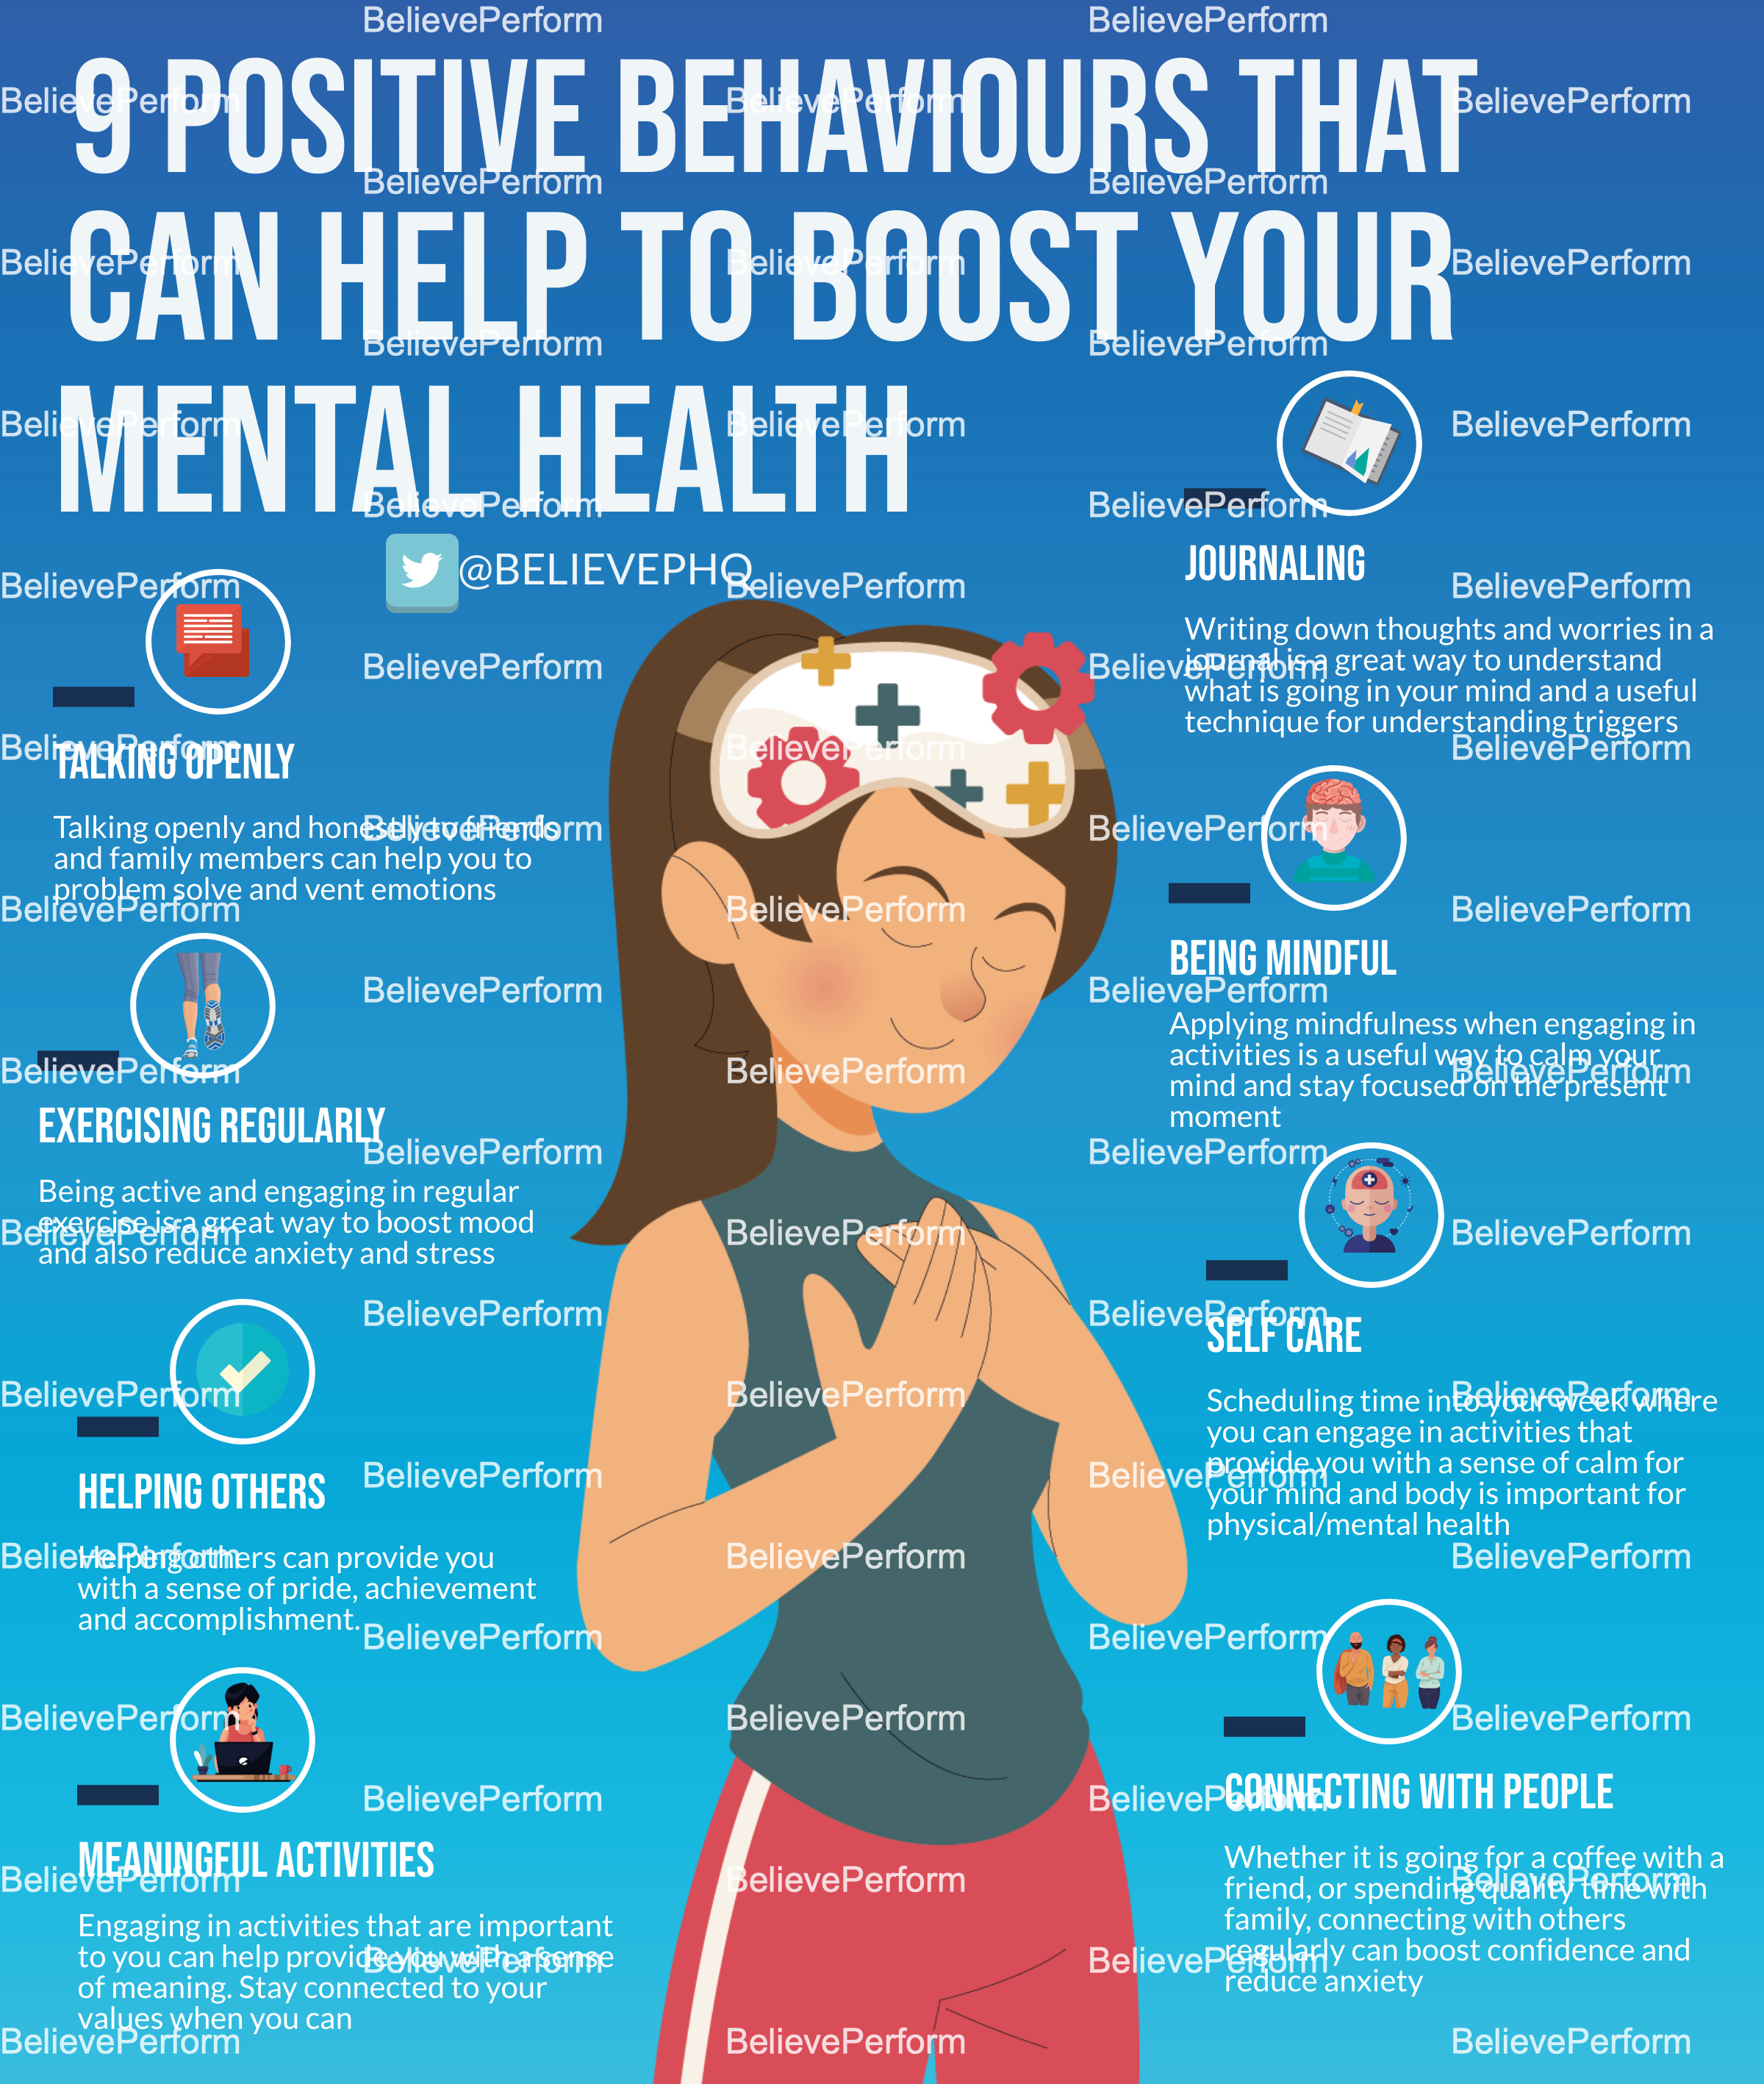 What Helps Mental Health?